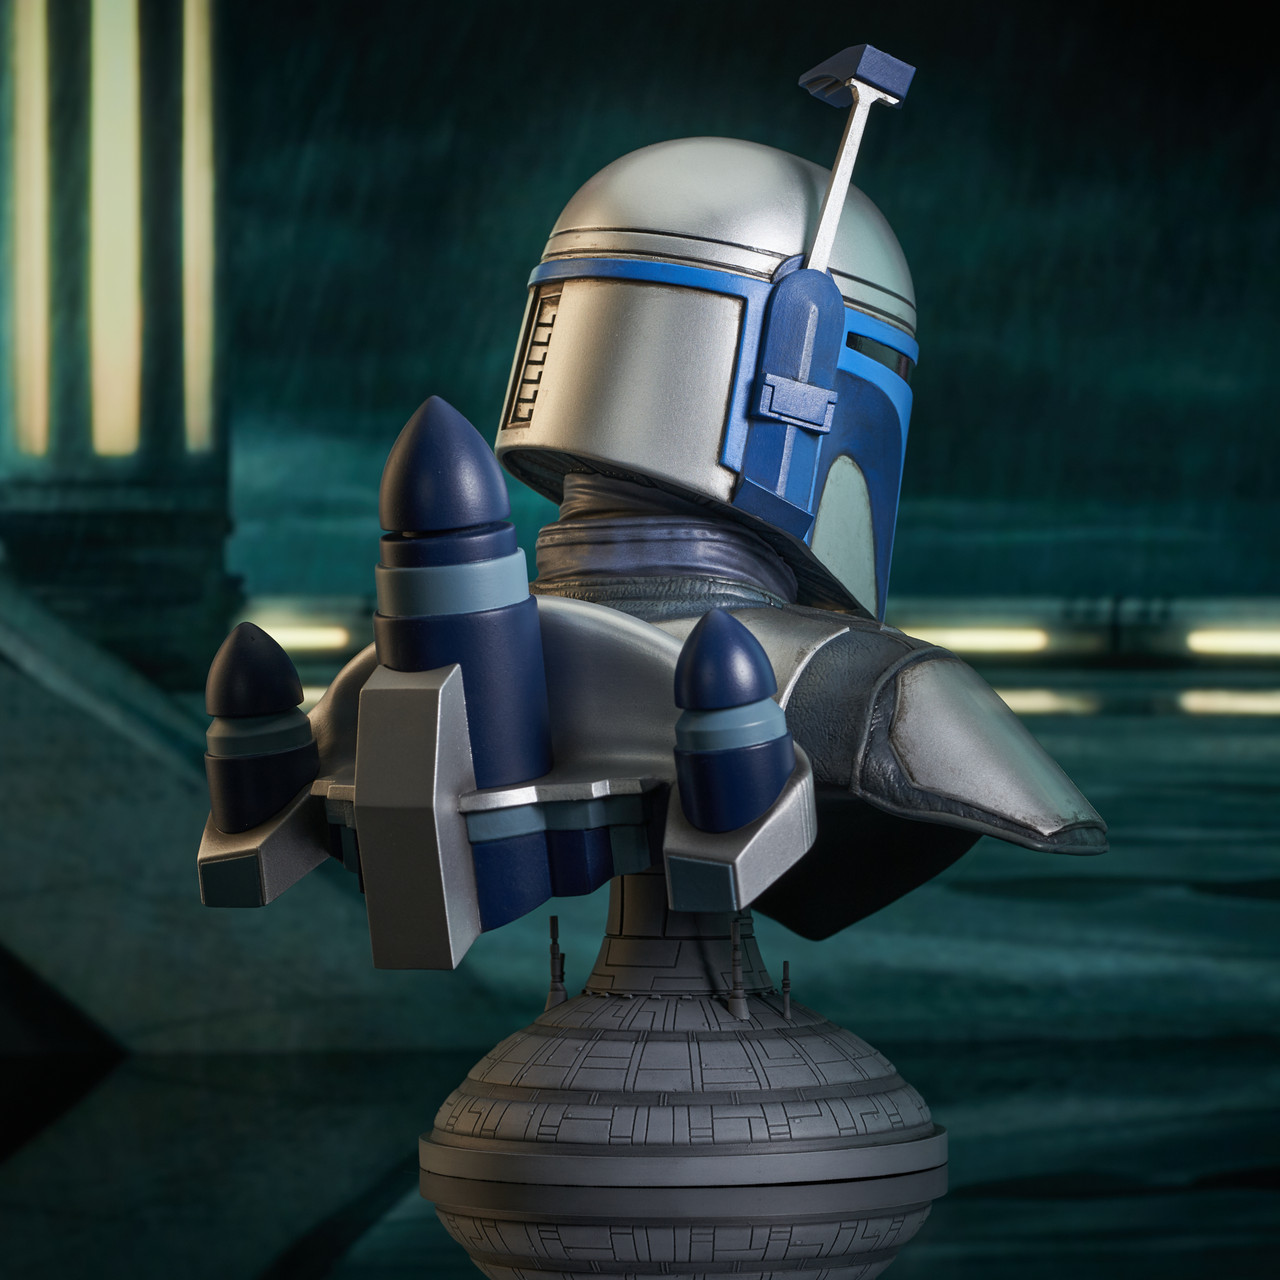 Gentle Giant Jango Fett Legends in 3D 1:2 Scale Bust Available For